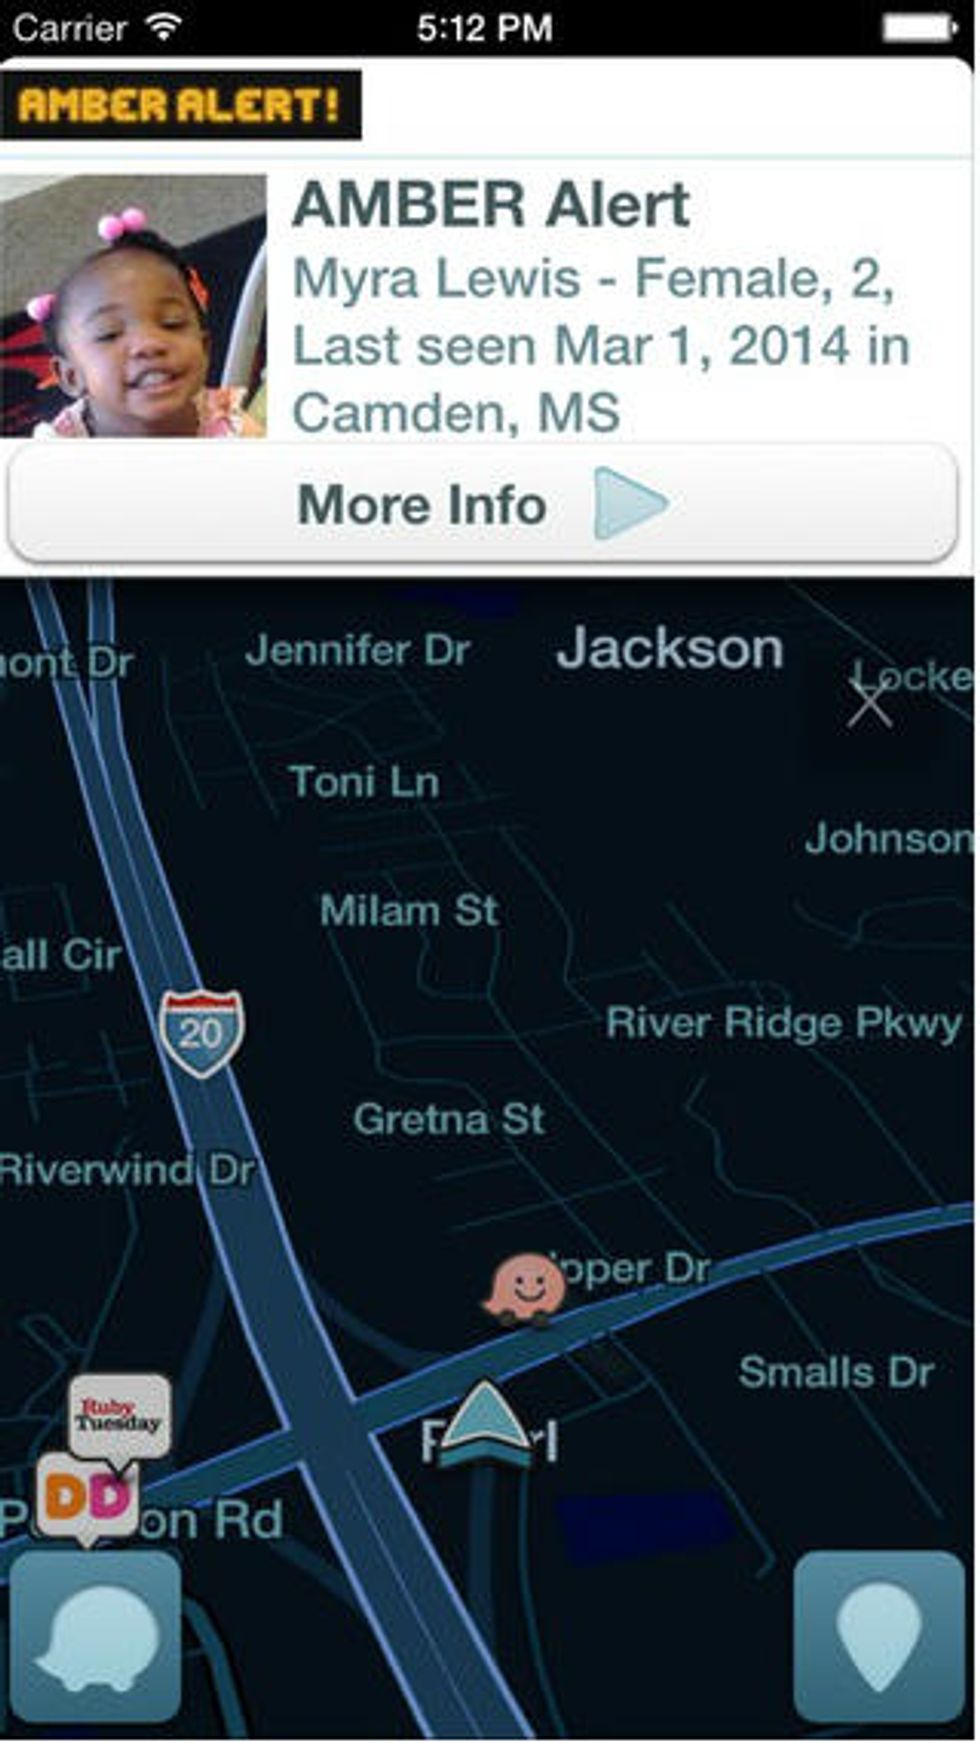 Google-Owned Traffic App Will Tap Into GPS Technology to Bring You Amber Alerts